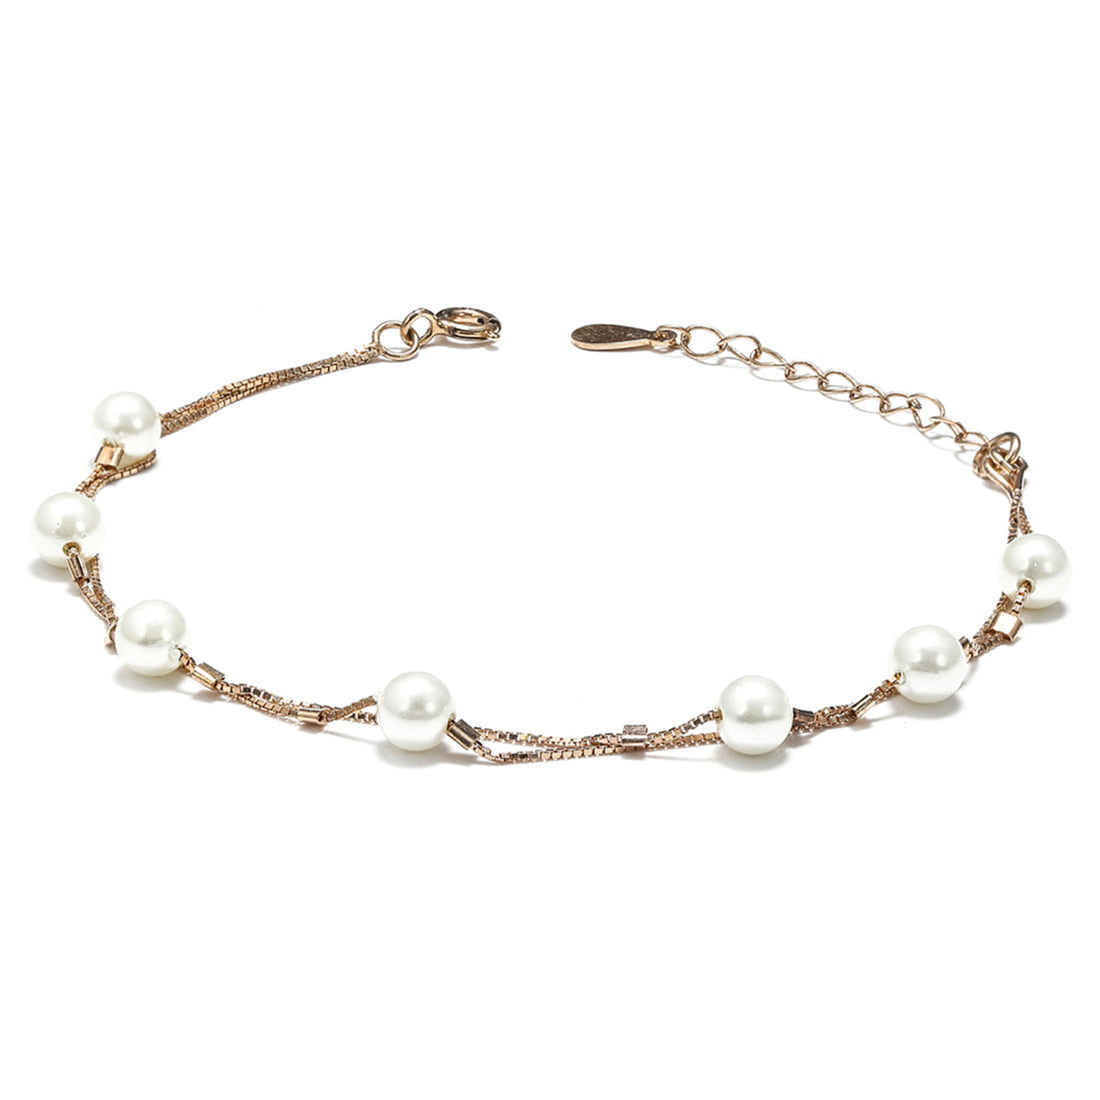 Victoria Freshwater Pearl 925 Silver Bracelet in Rose Gold